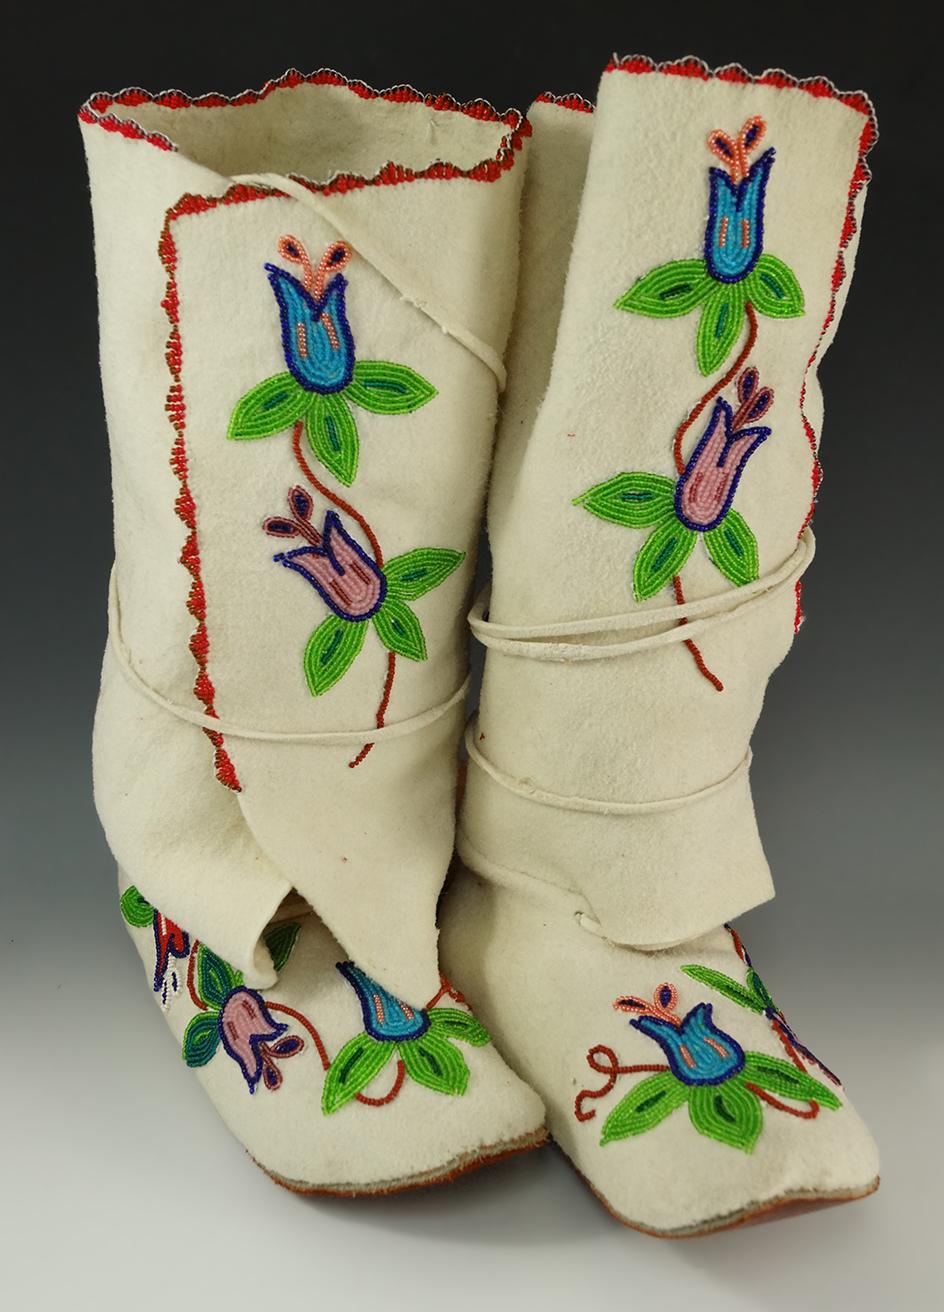 Pair of contemporary beaded Boots.